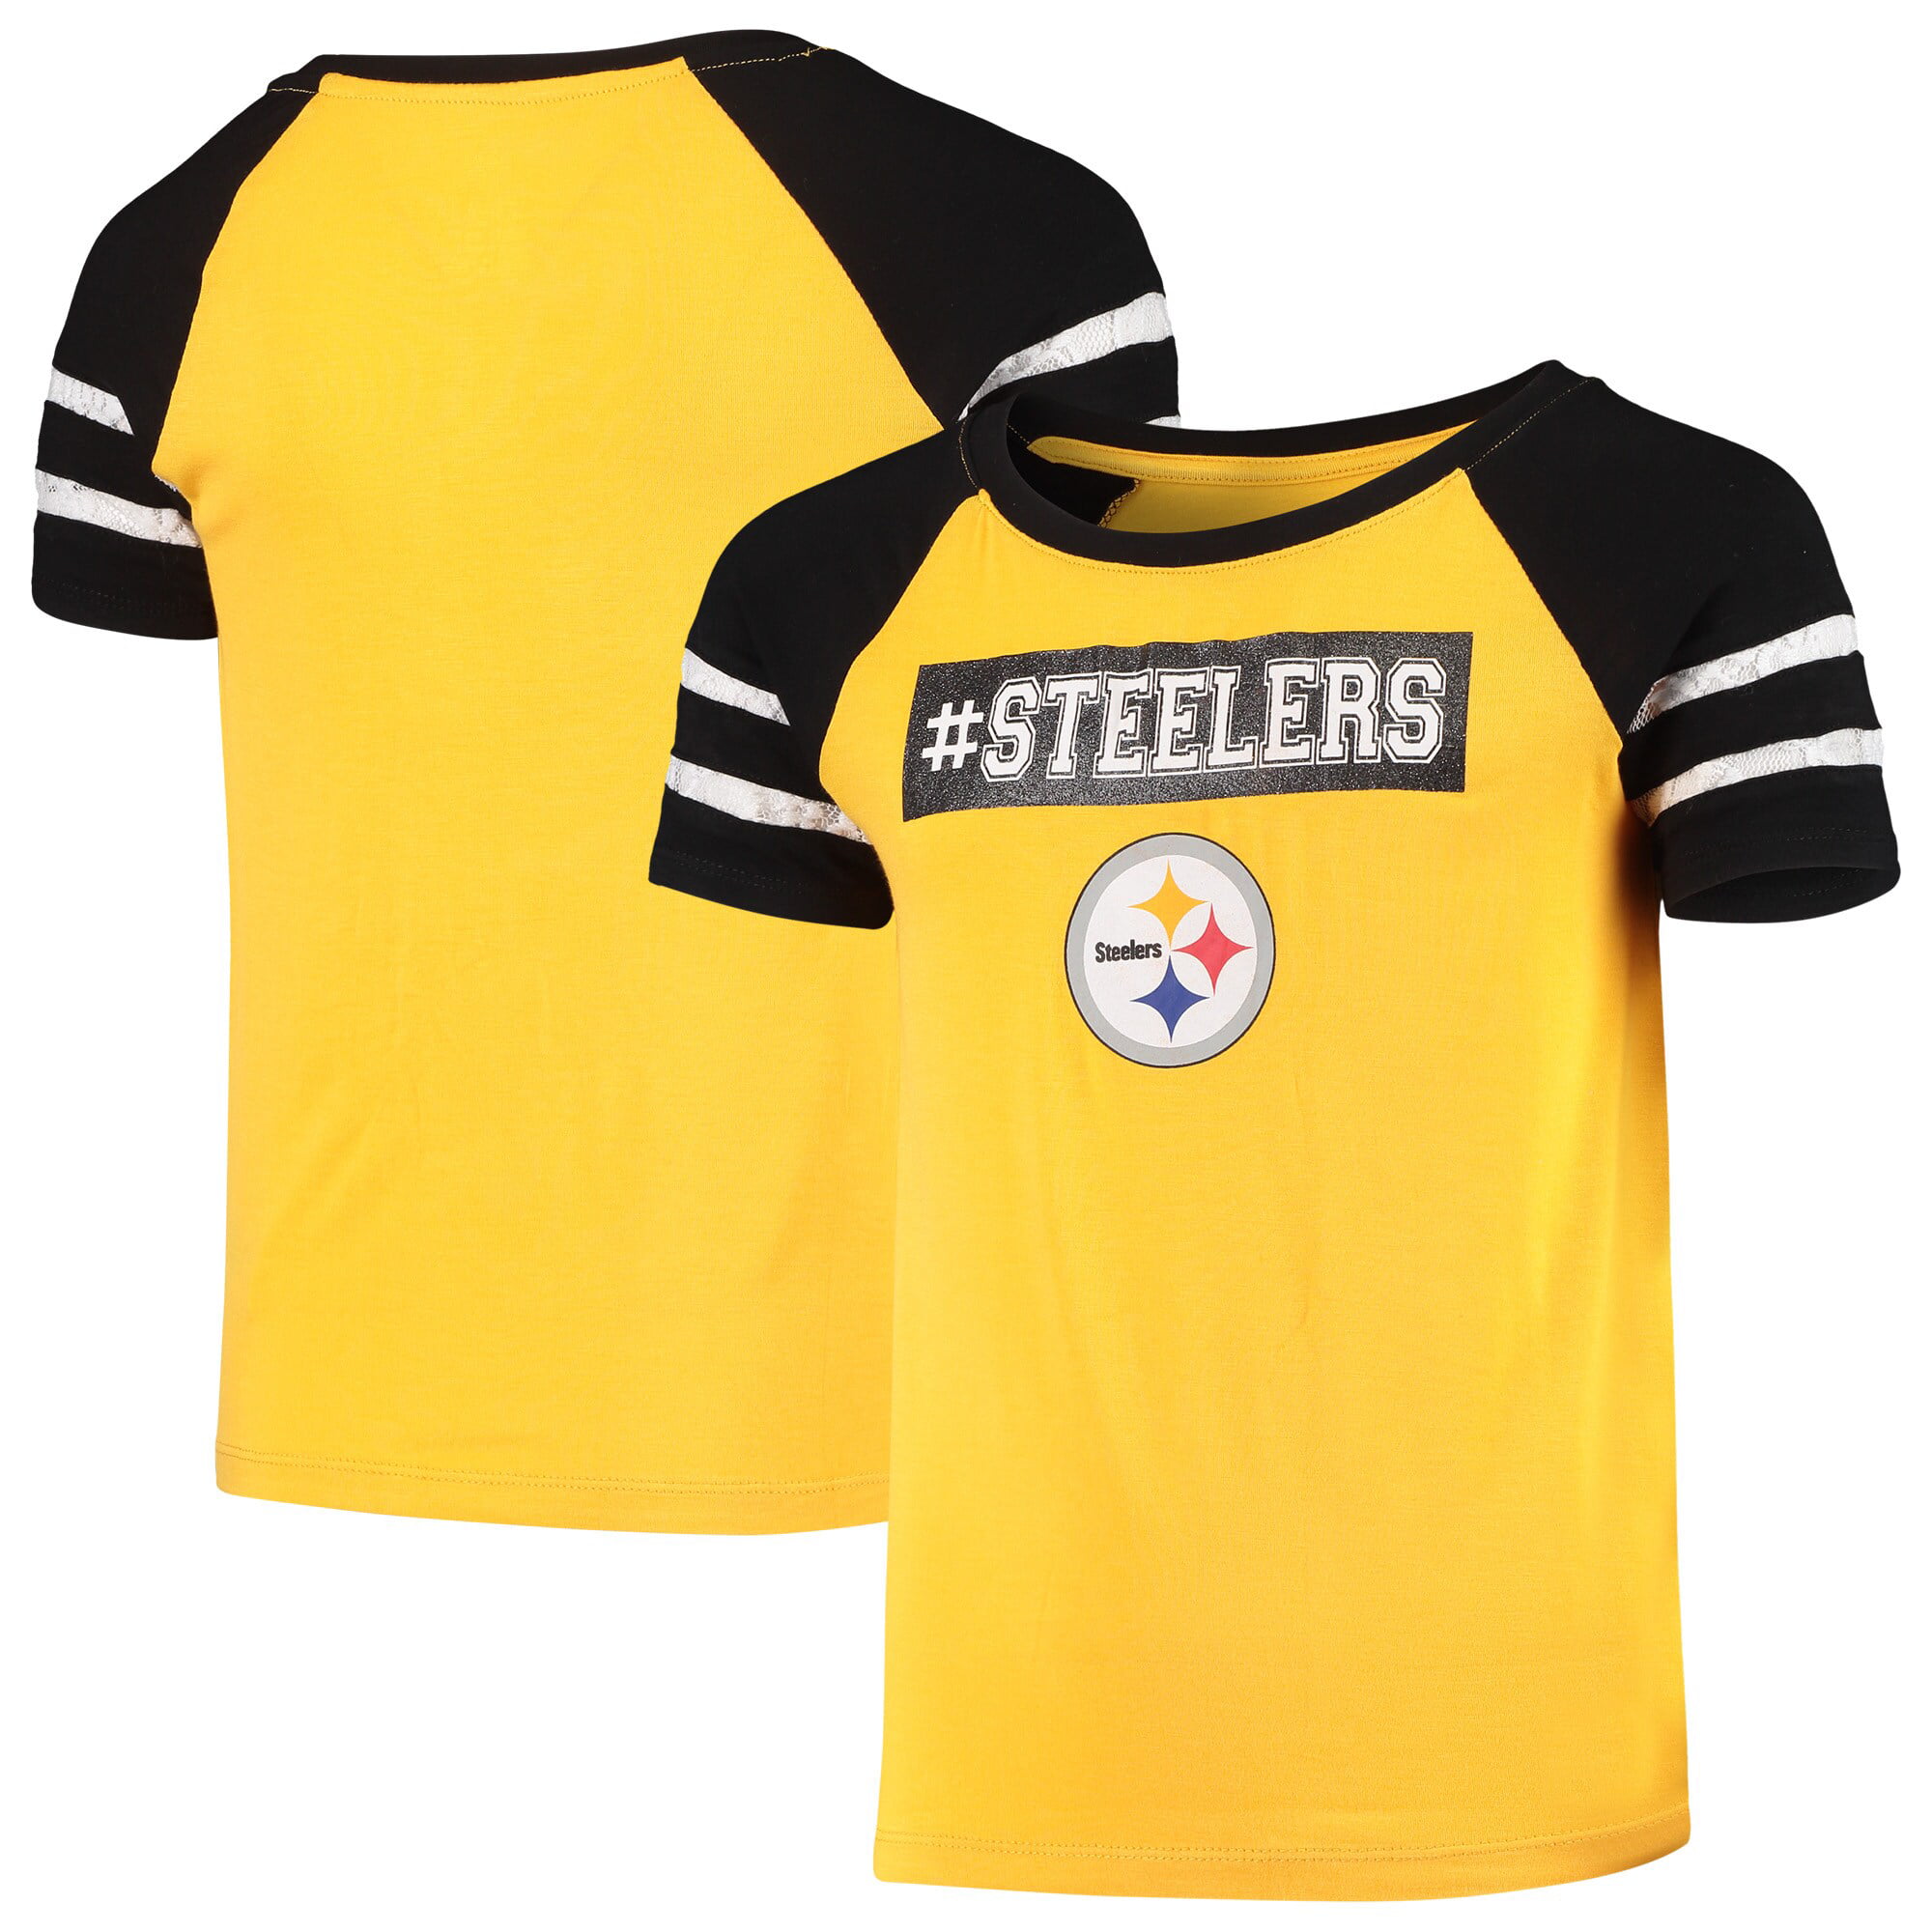 Outerstuff Pittsburgh Steelers Yellow Youth Team Apparel V-Neck Shirt